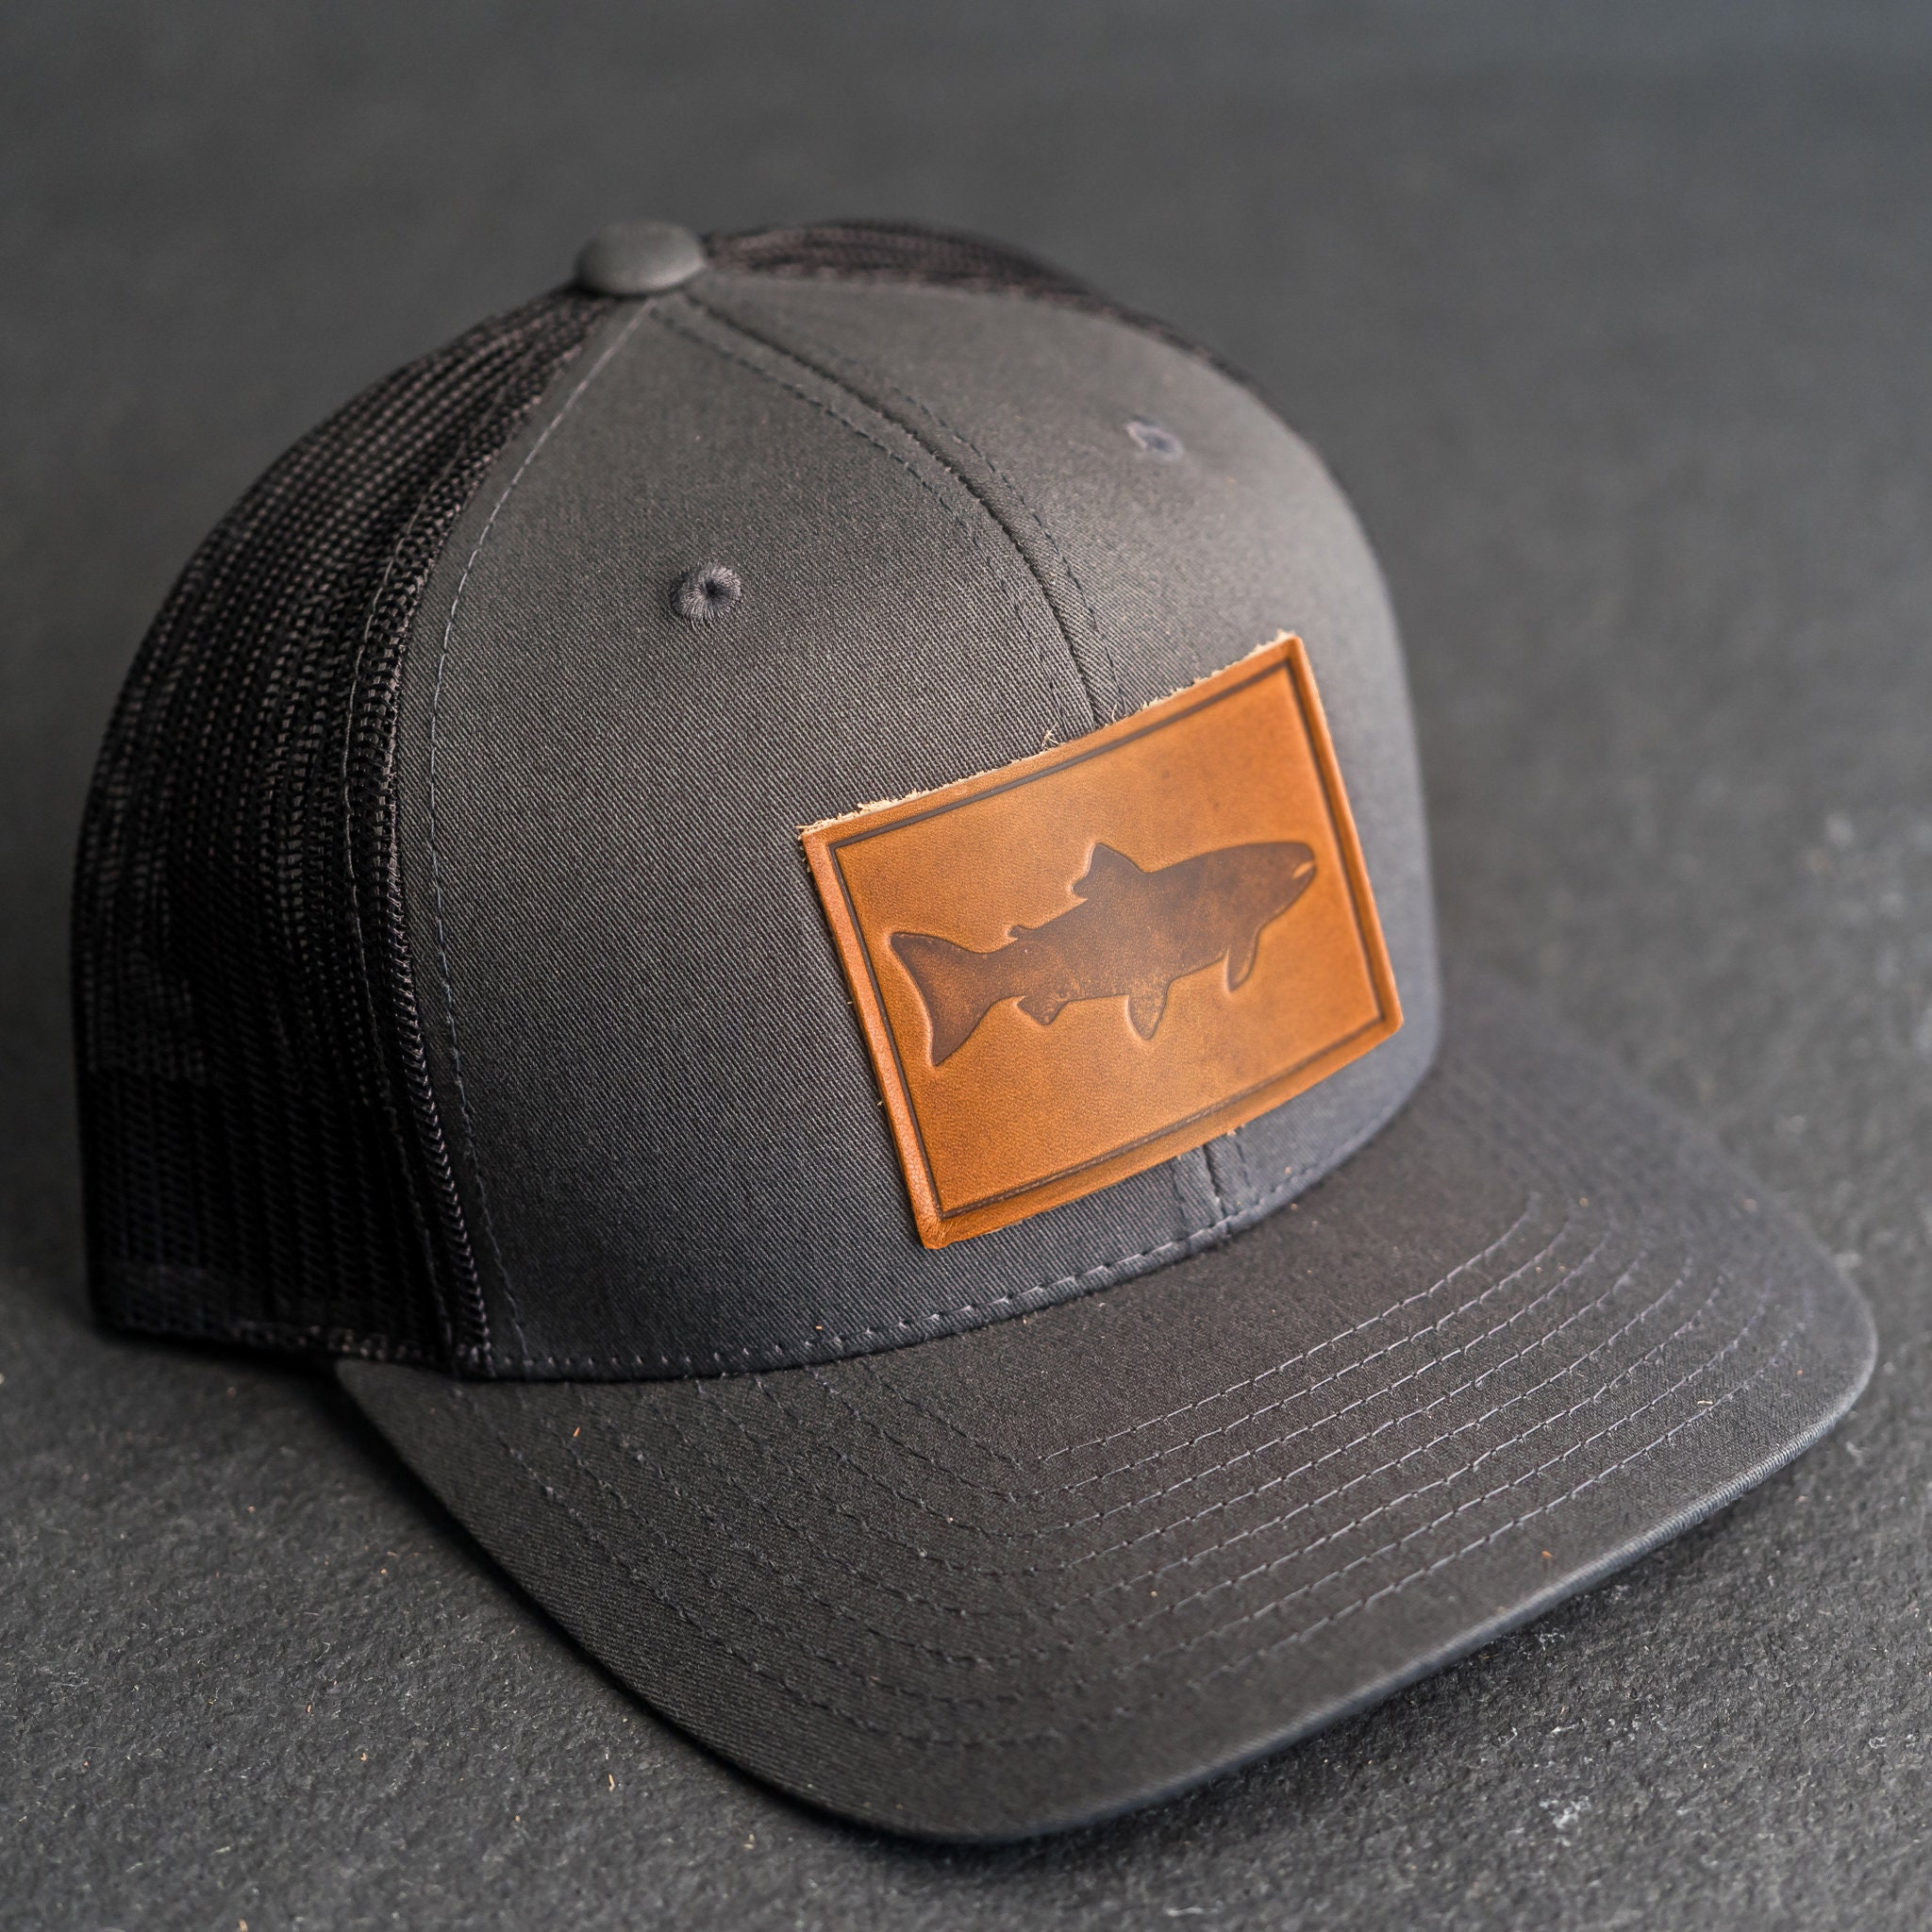 Fish Stamp Hat Leather Patch Trucker Style Hats for Him or Her Fishing Hat  Outdoor Hiking Apparel Gift Ideas 